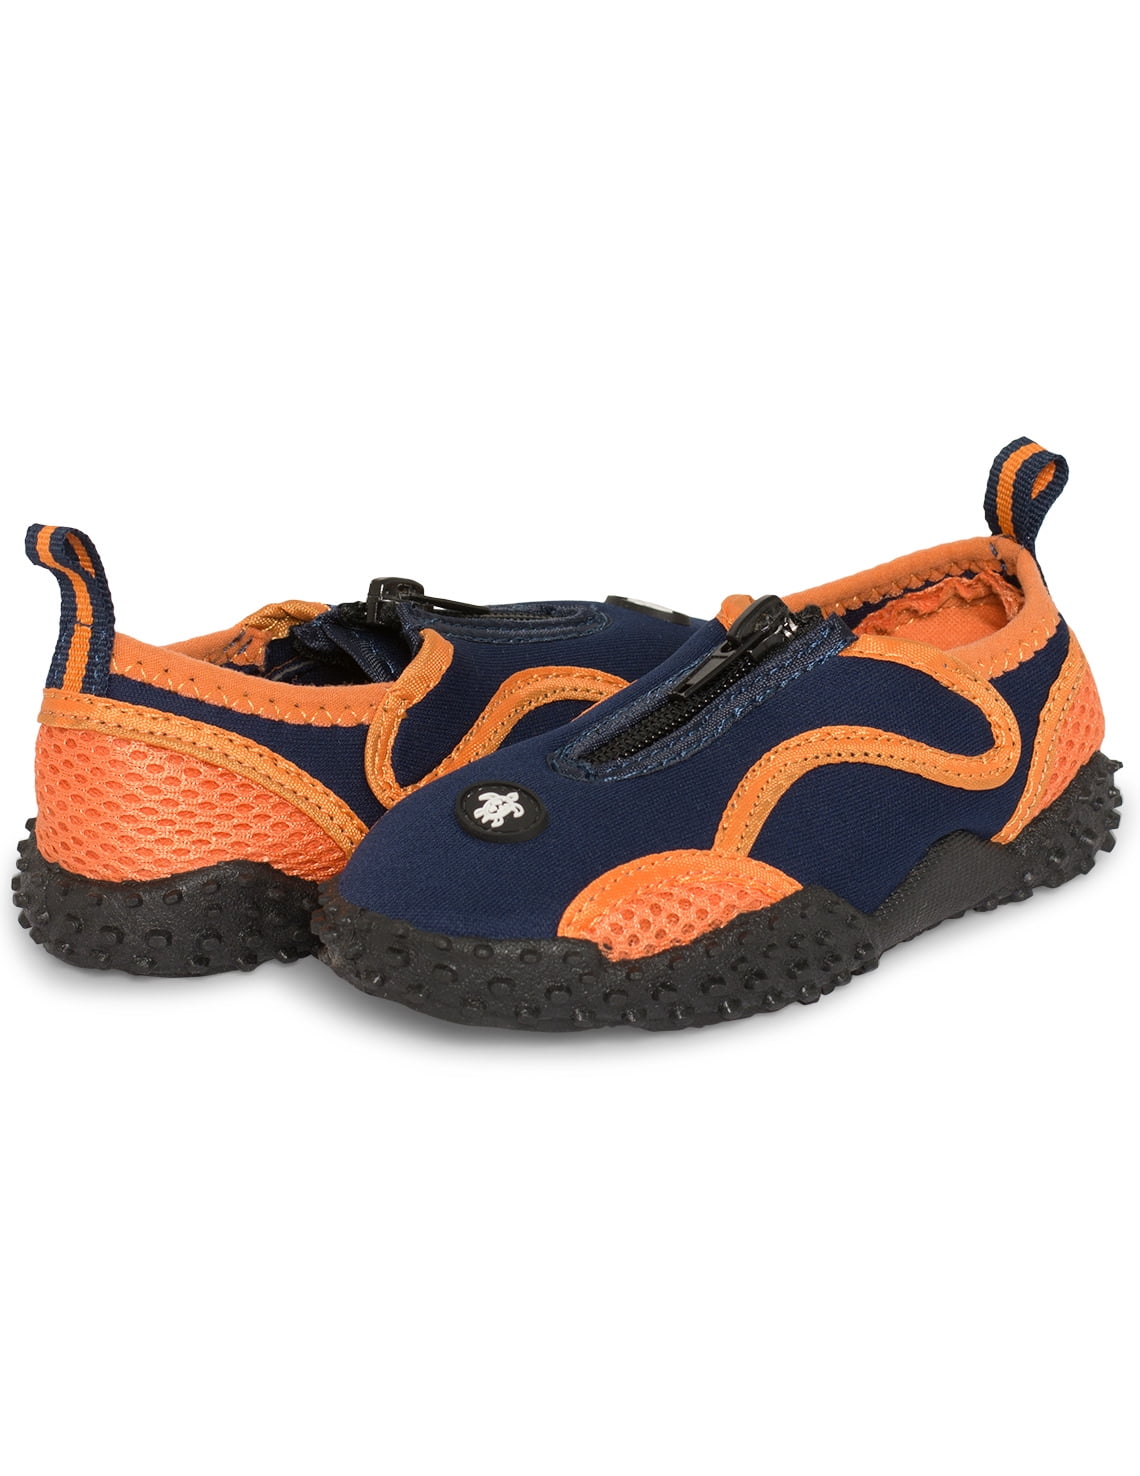 water shoes infant